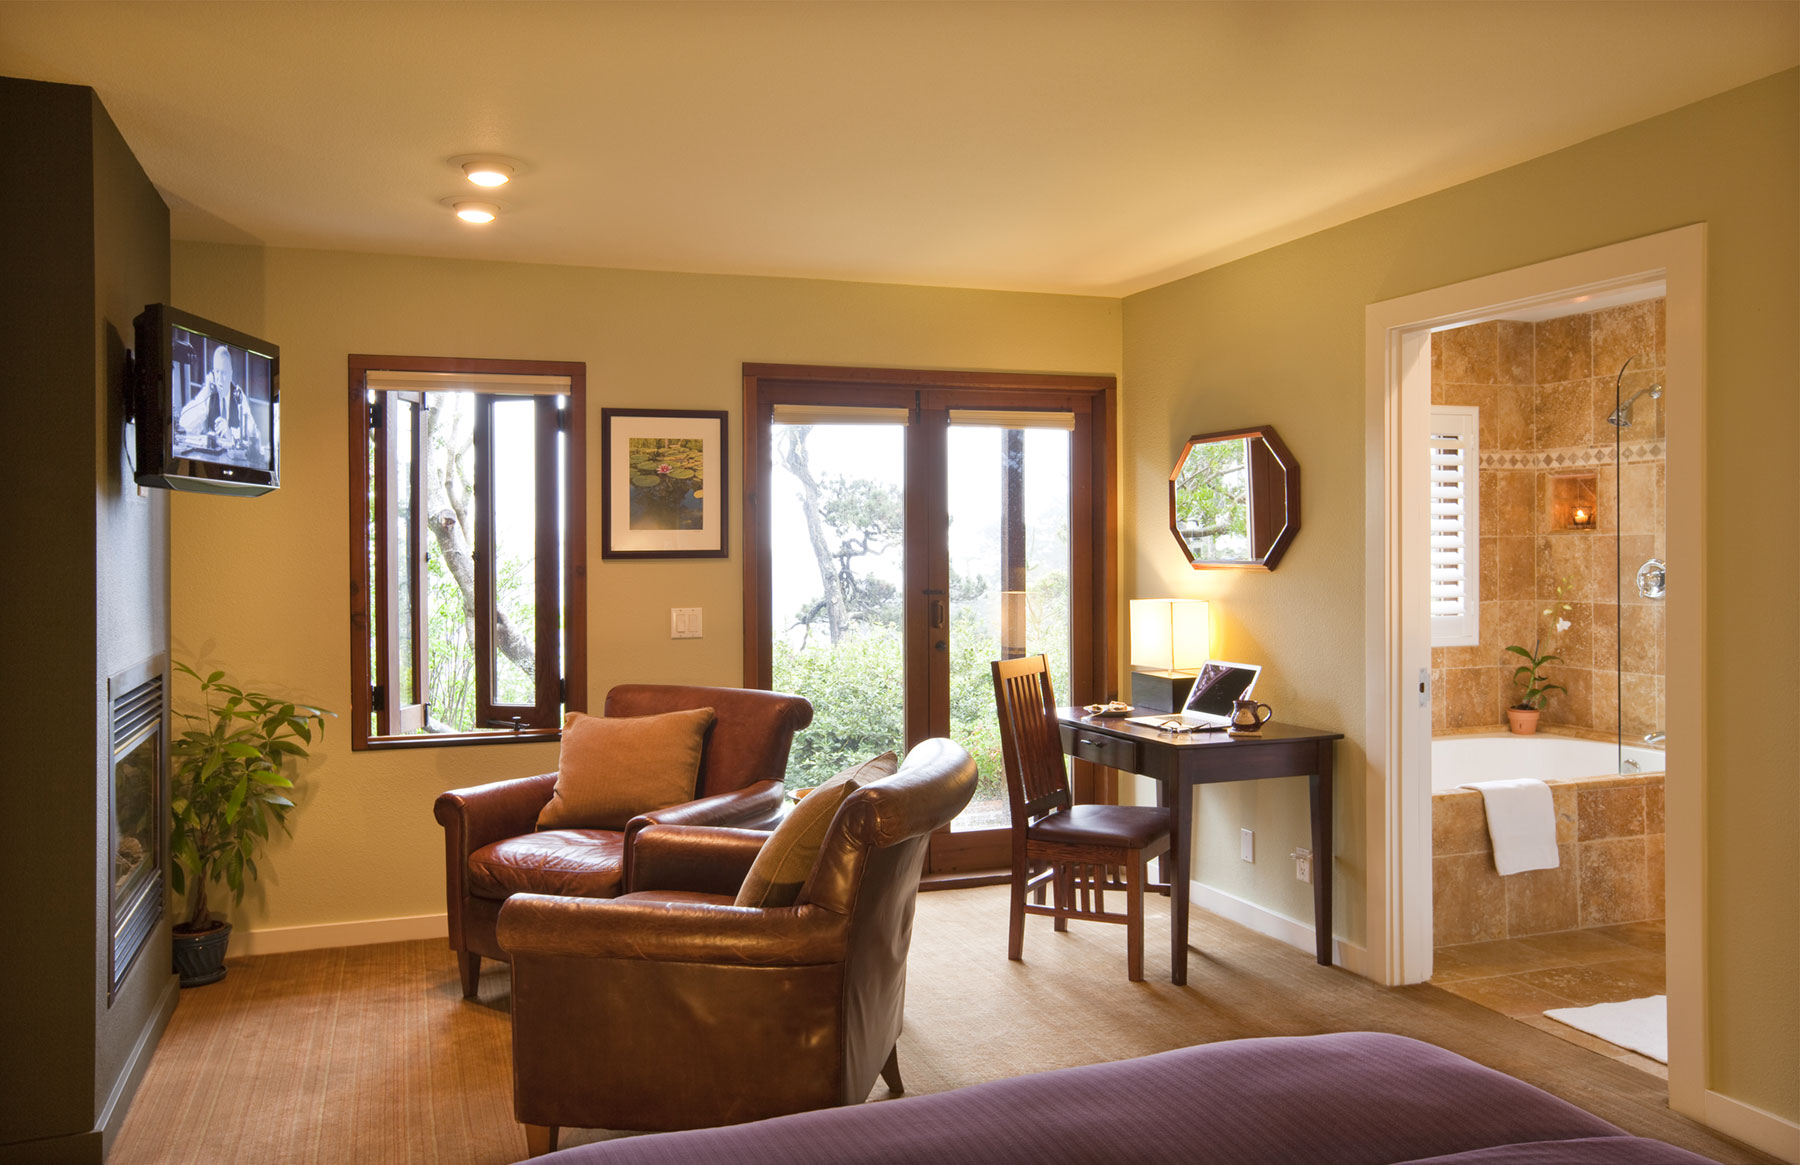 The Pine room with leather chairs in front of fireplace and flat screen TV, desk, French Doors, and tiled bathroom